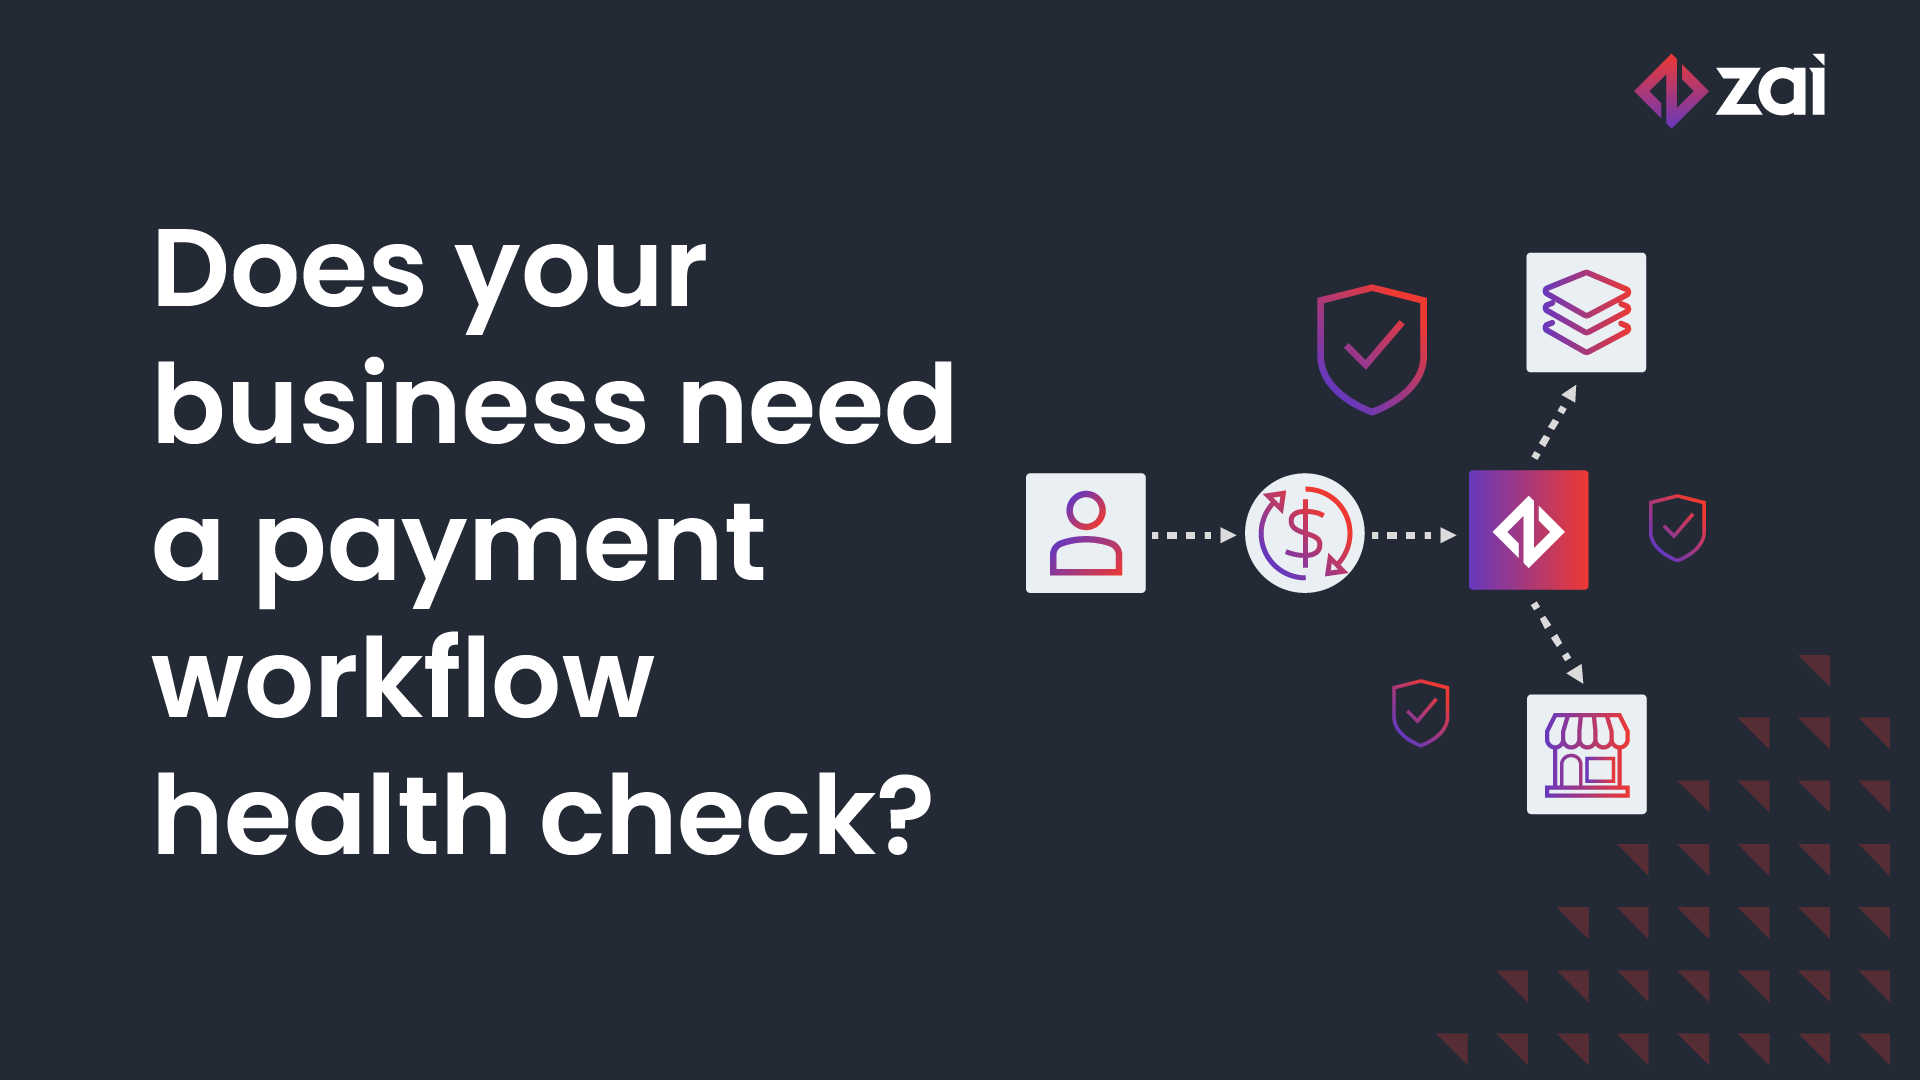 Does your business need a payment workflow health check?